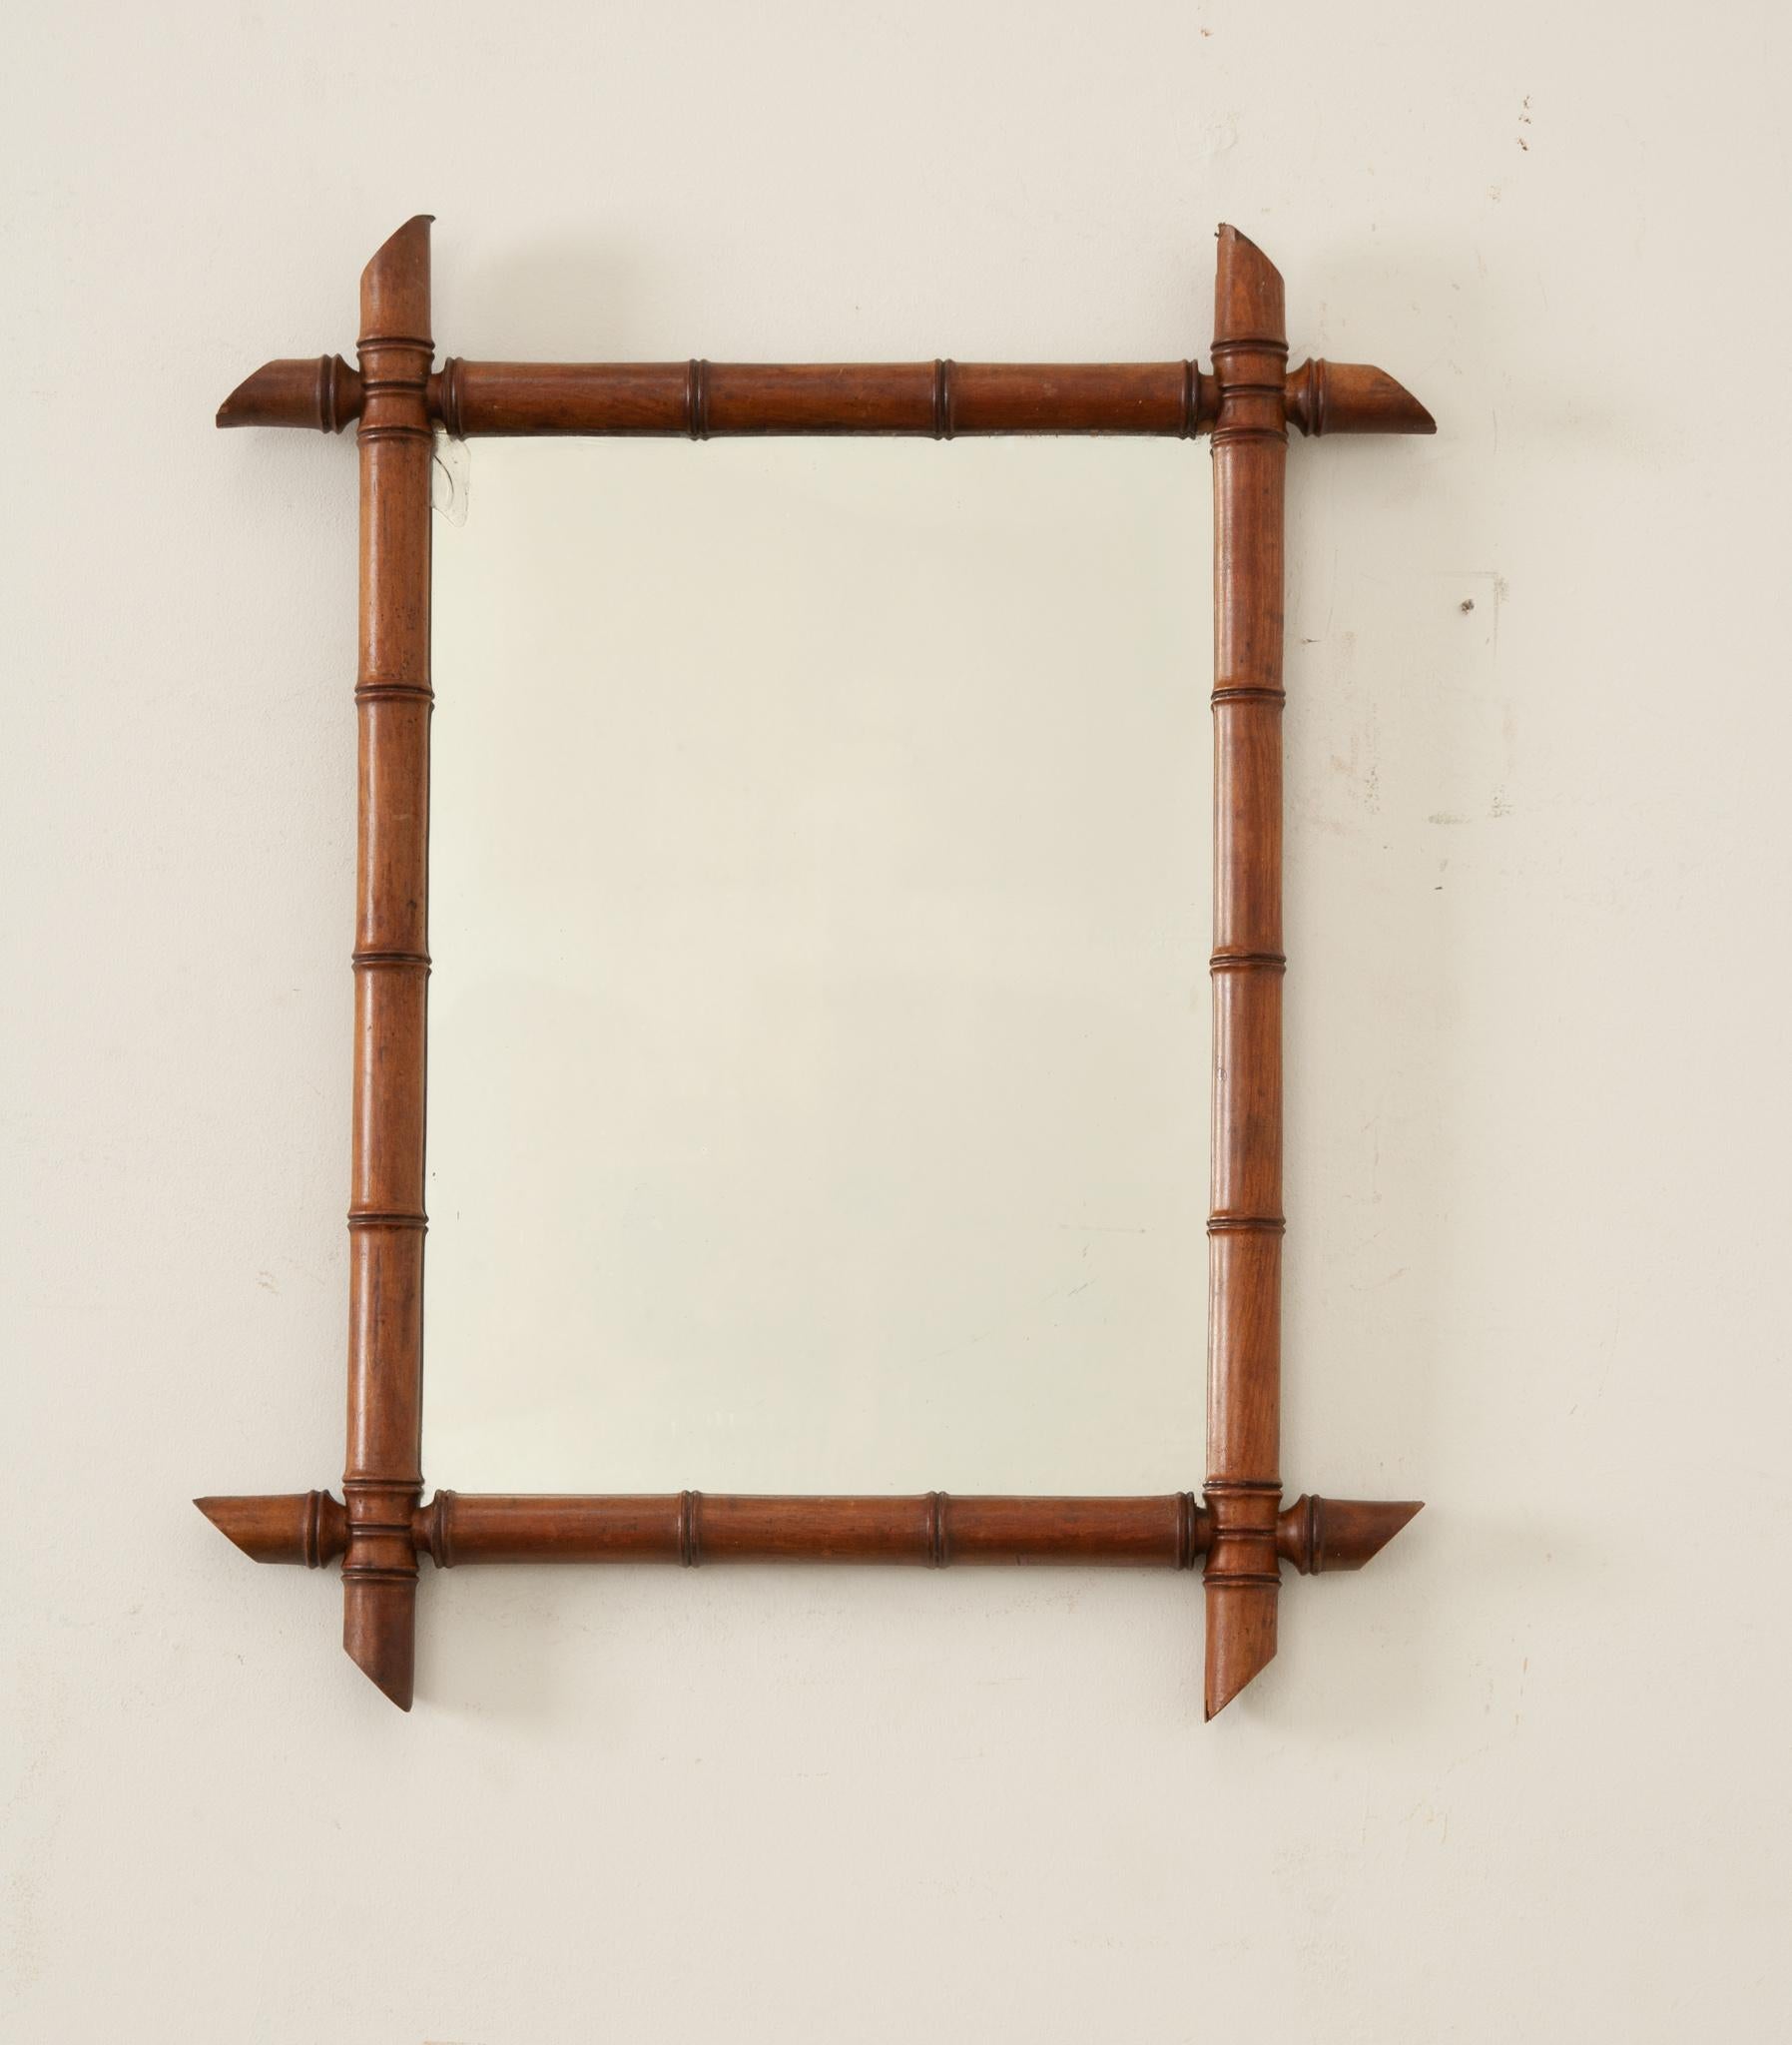 A French faux bamboo mirror circa 1900 with slanted accents, rich brown patina, and chic style. This mirror invites the opulence of history into your interior and is a nod to turn of the century elegance and charm.  The mirror’s wood frame has been